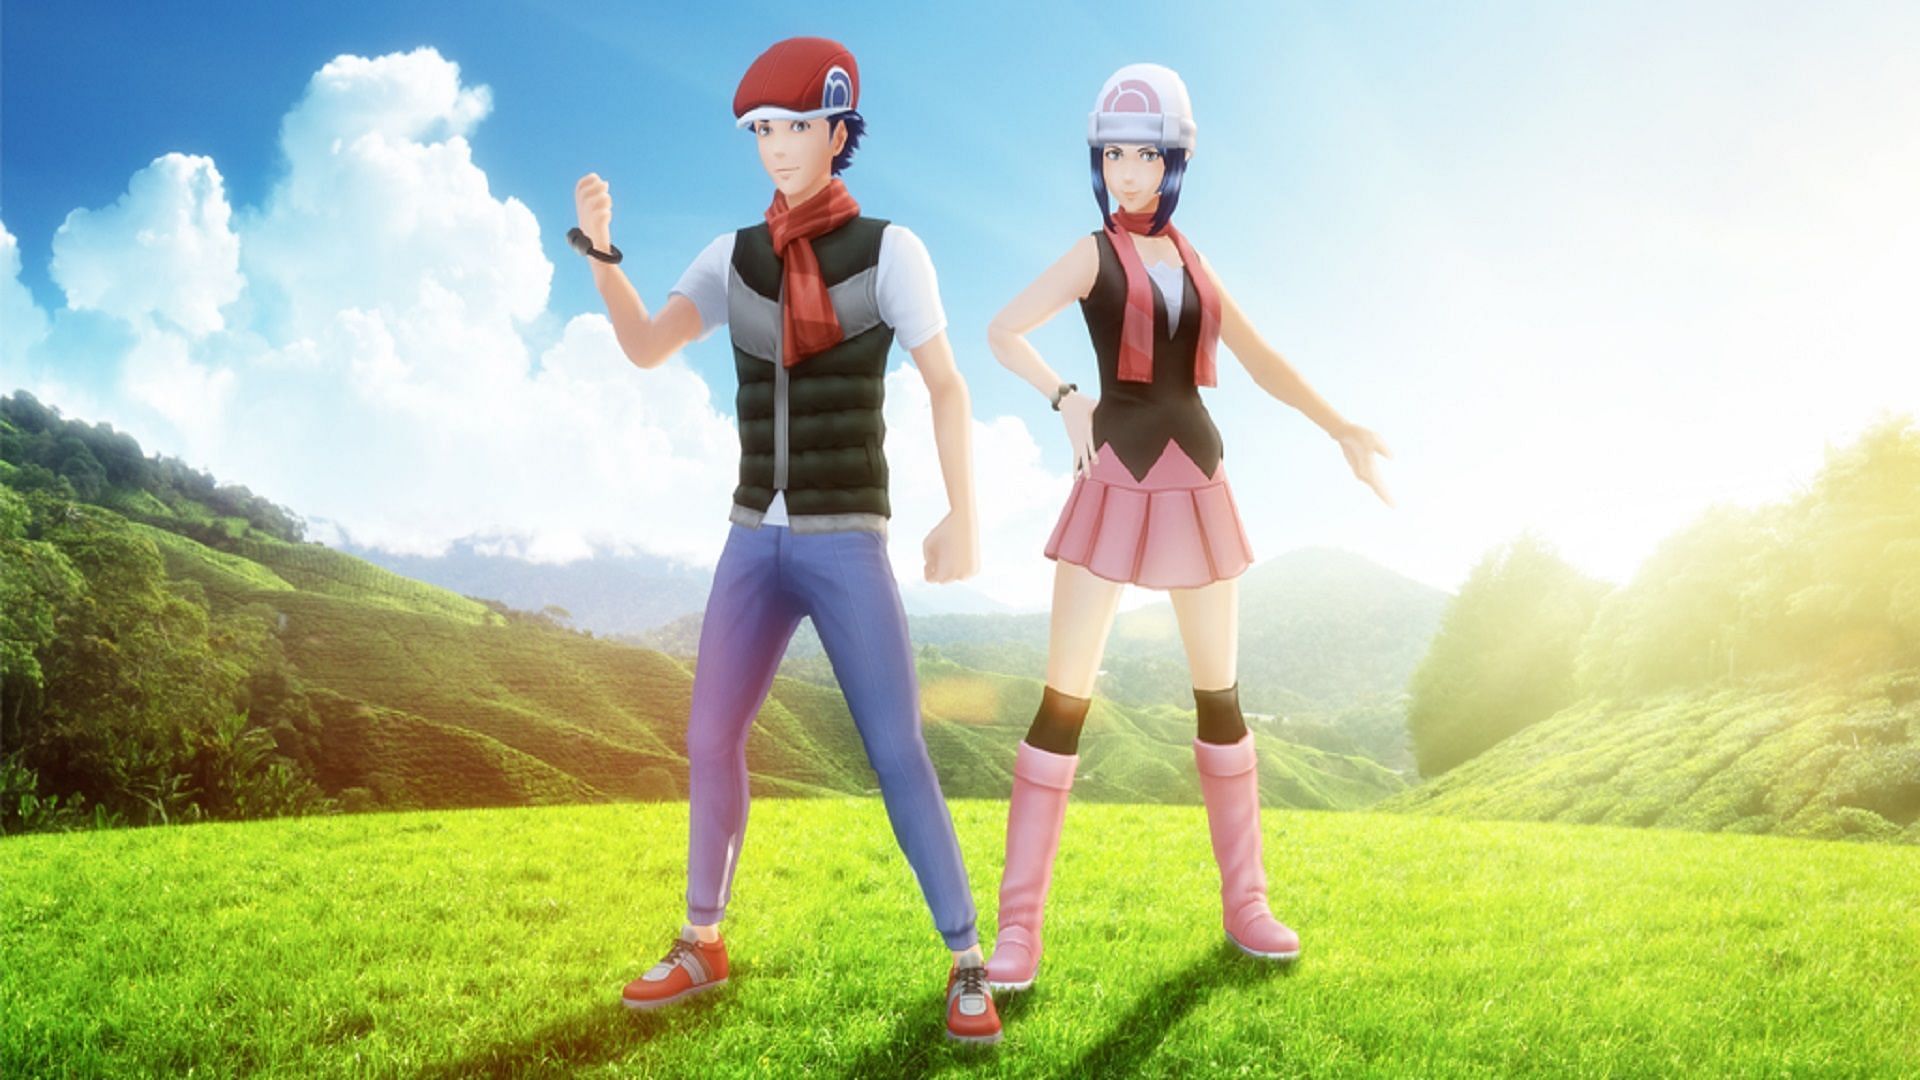 Trainers can find plenty of new Sinnoh-themed customizations during the Brilliant Diamond and Shining Pearl event (Image via Niantic)